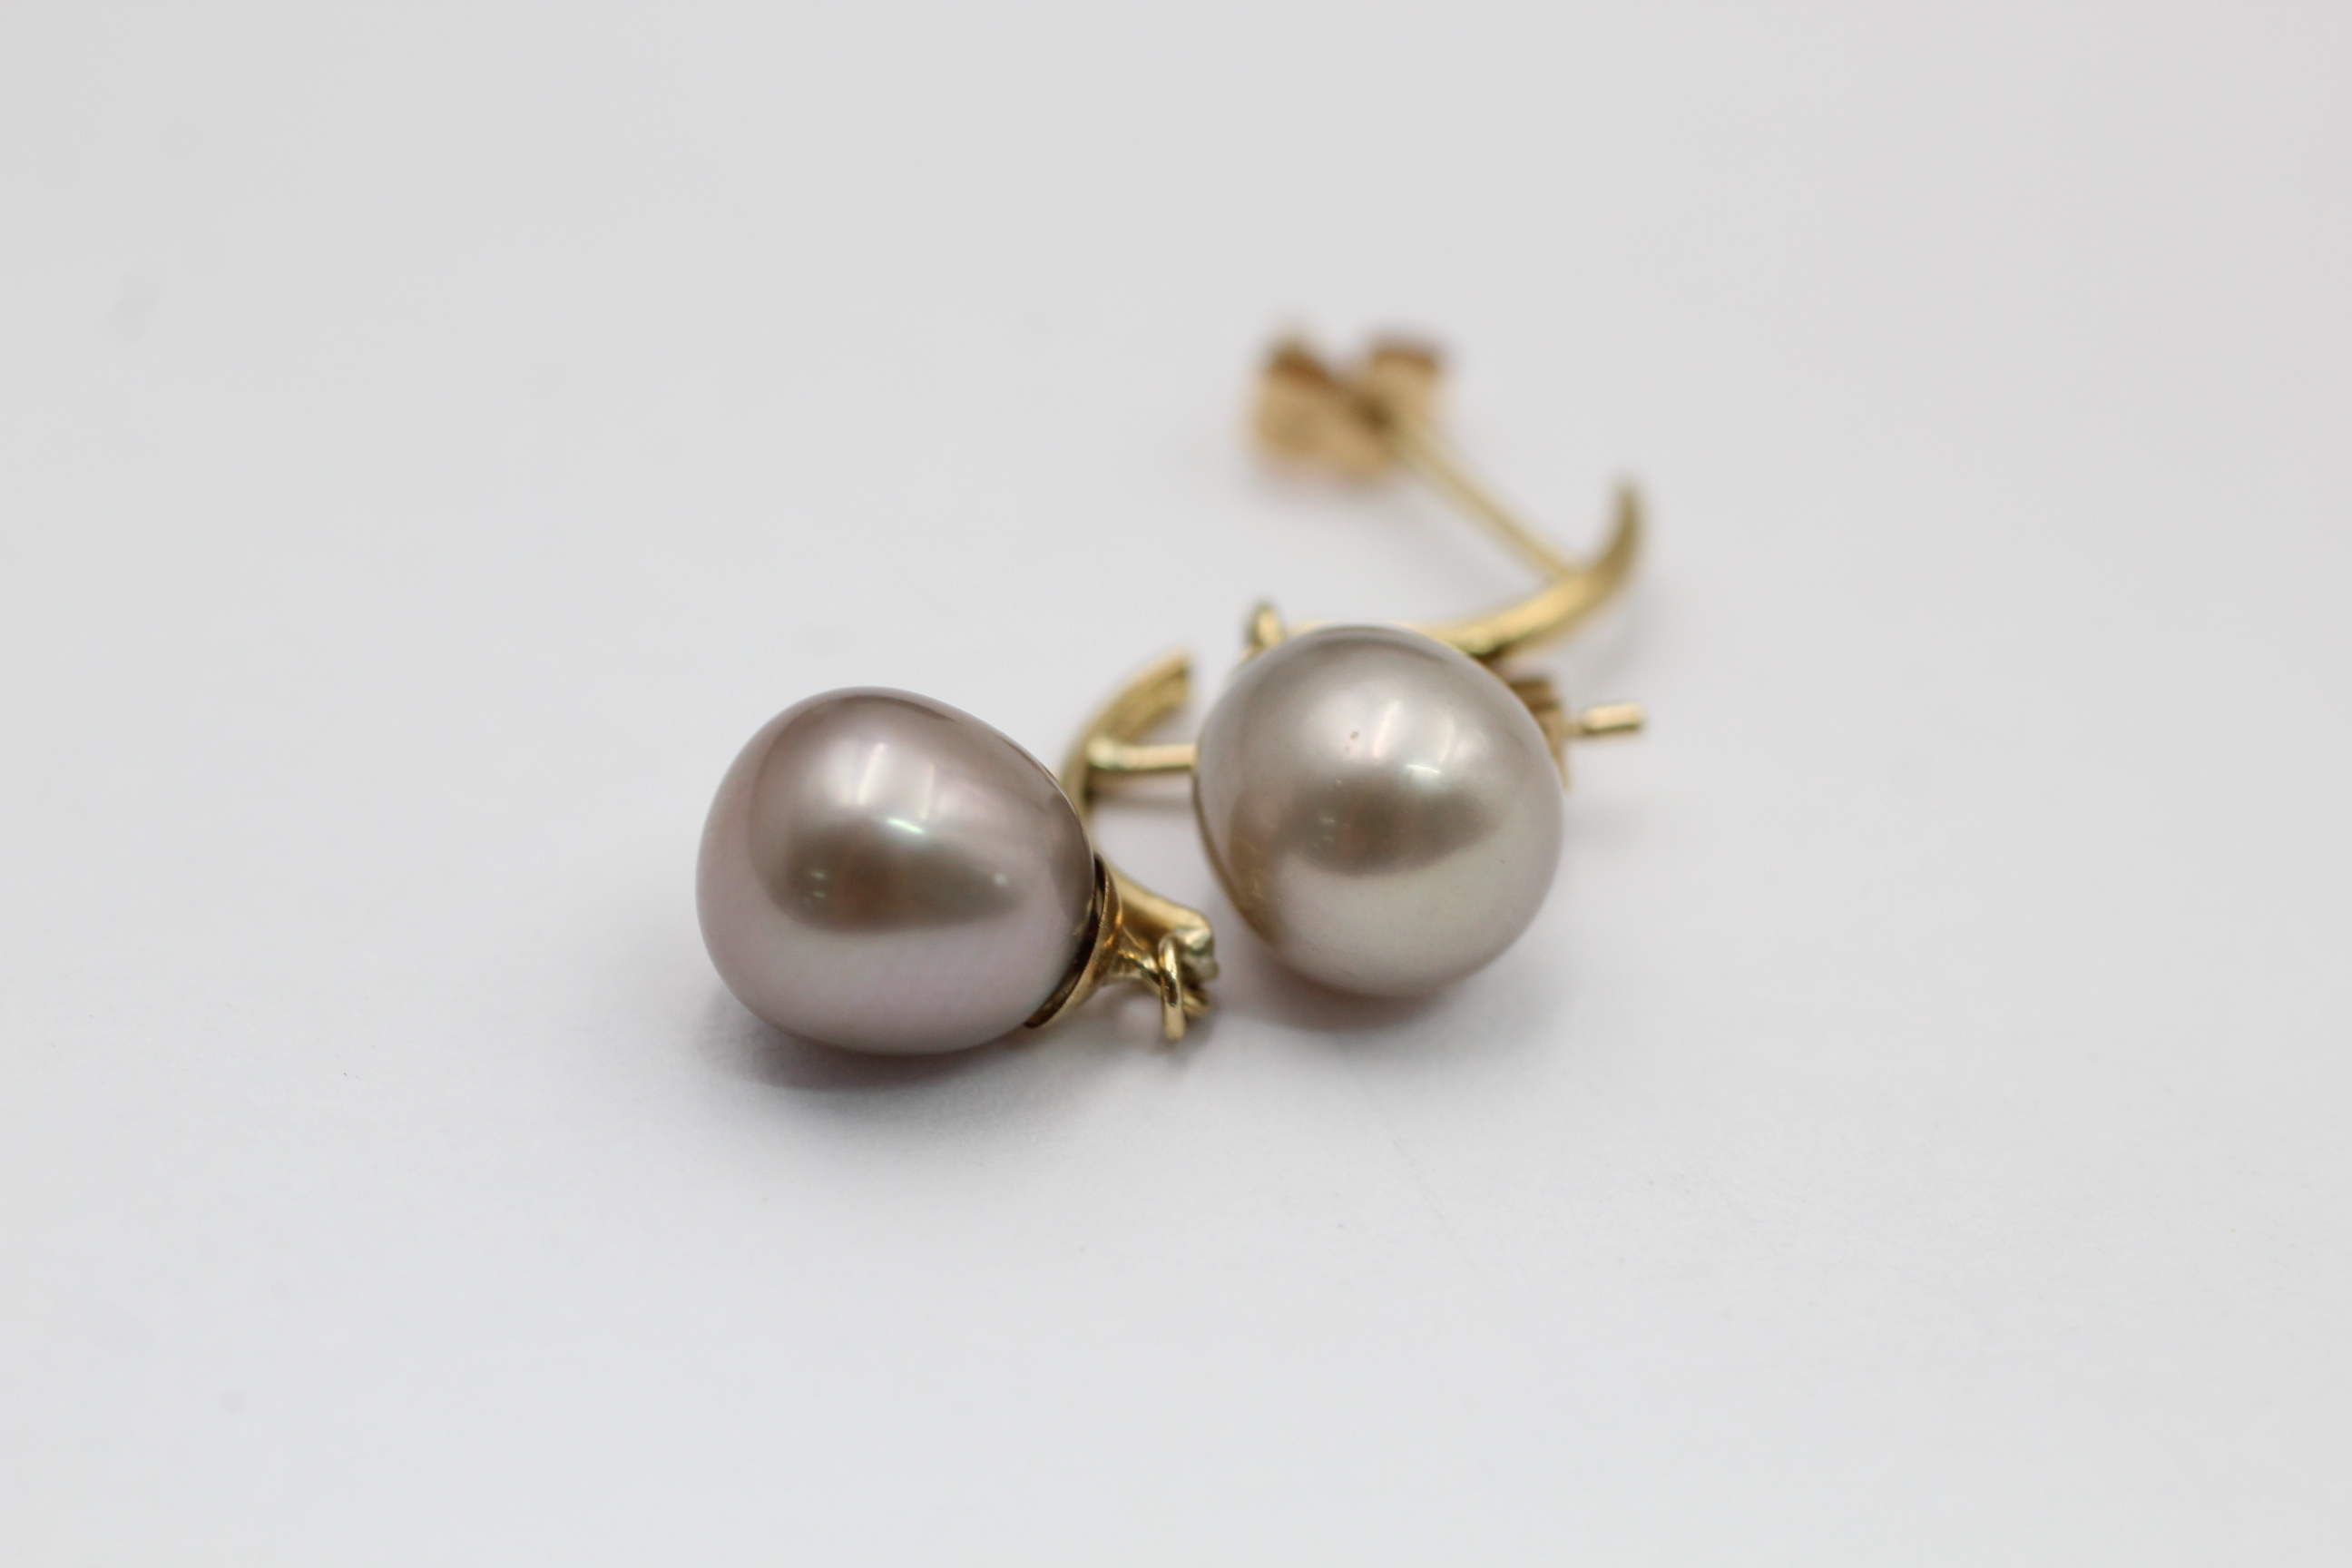 9ct gold pearl drop earrings (1.6g) - Image 4 of 4